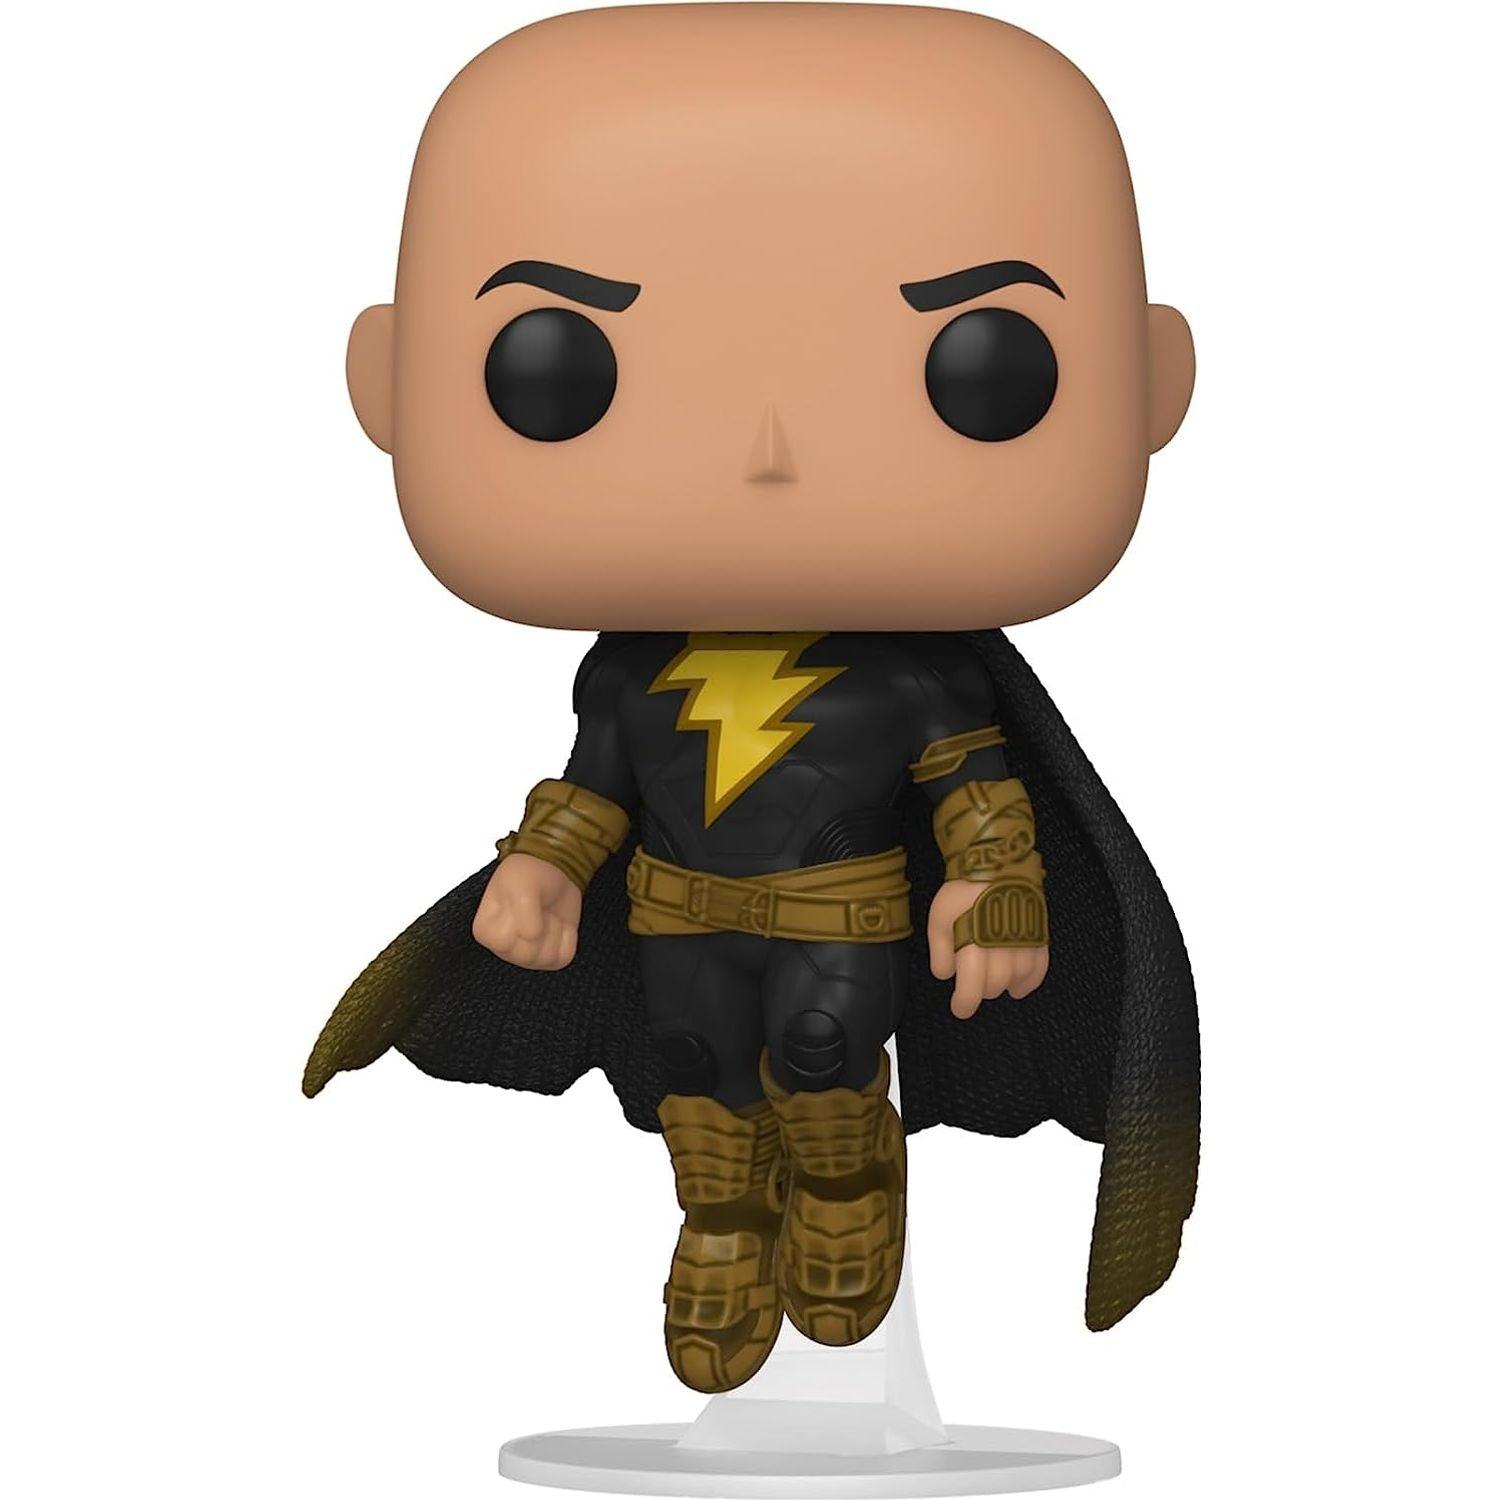 Funko Pop! Movies Black Adam - Flying with Cape - BumbleToys - 18+, Action Figures, Boys, Characters, DC Comics, Figures, Funko, Pre-Order